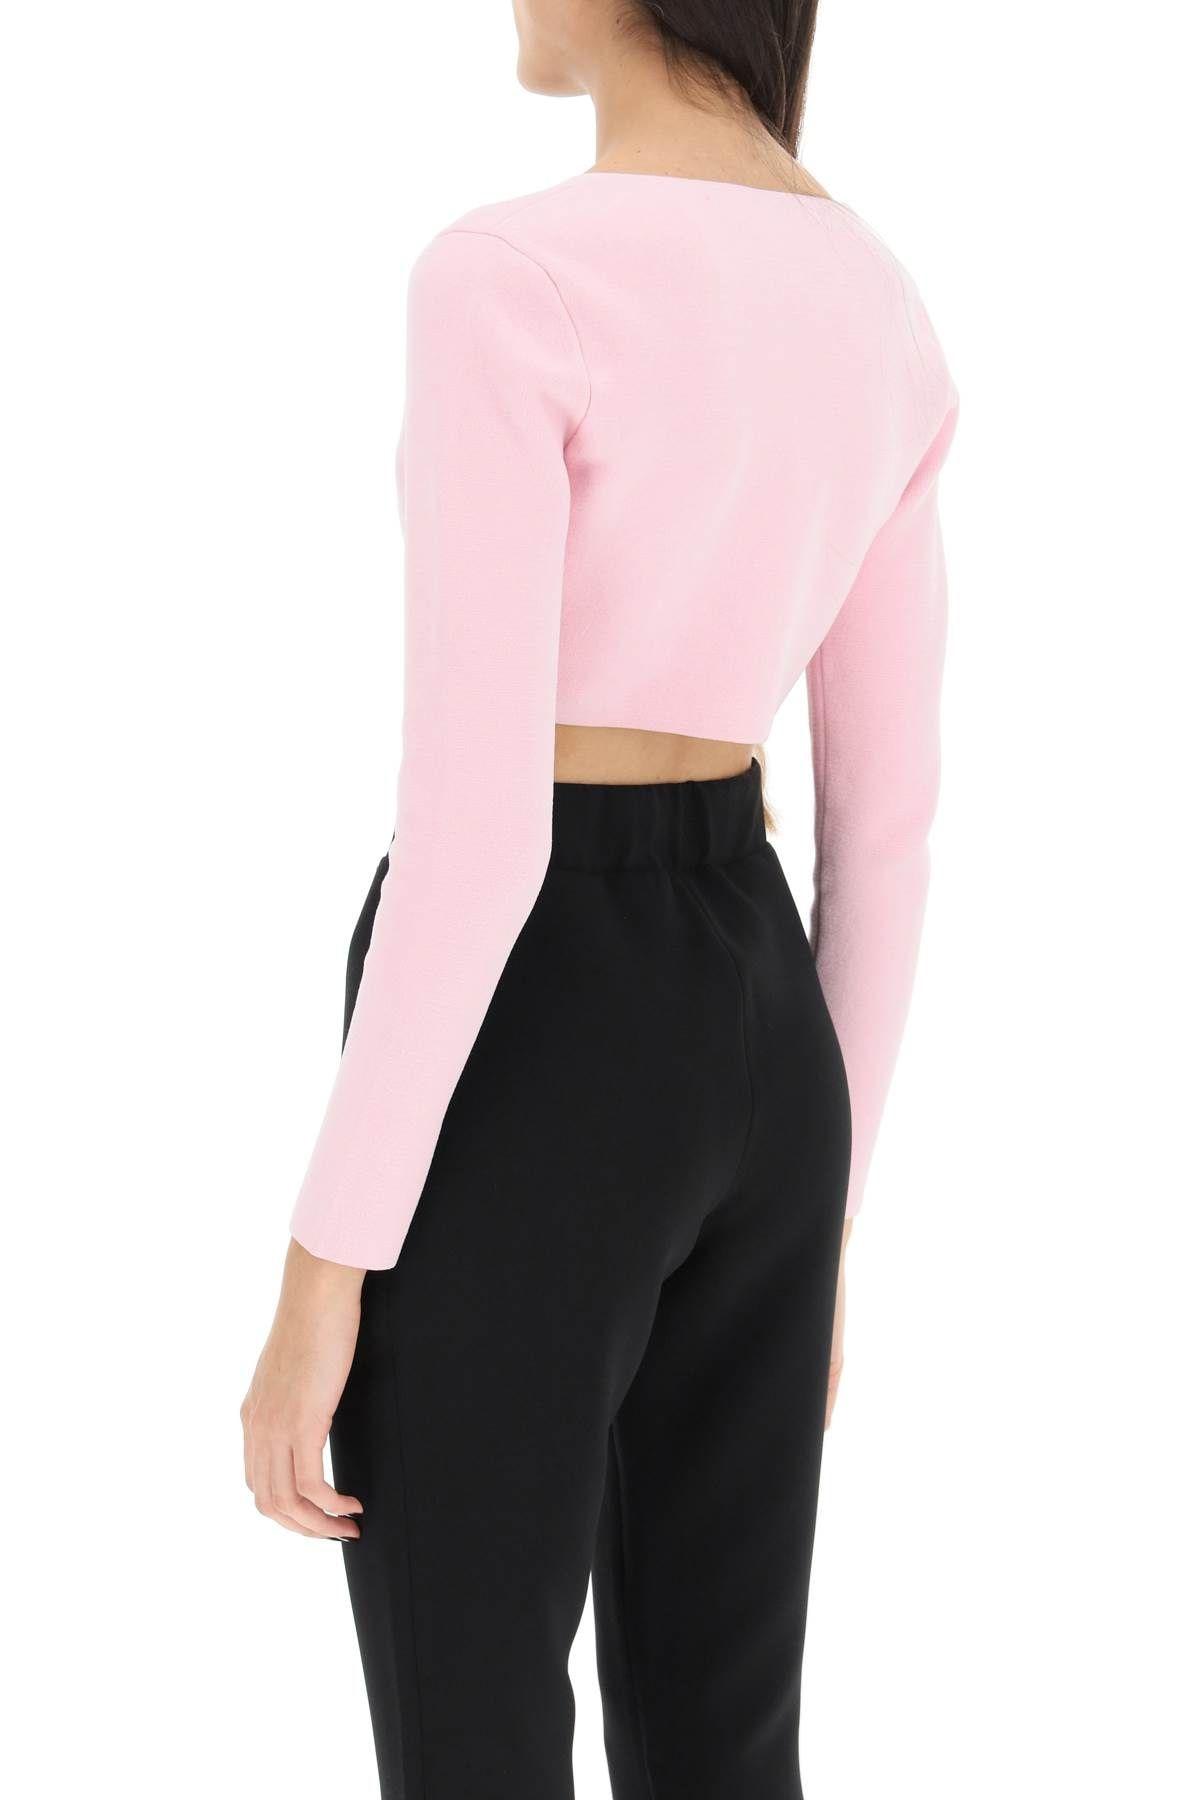 ALEXANDER WANG CROPPED CARDIGAN IN COTTON CHENILLE